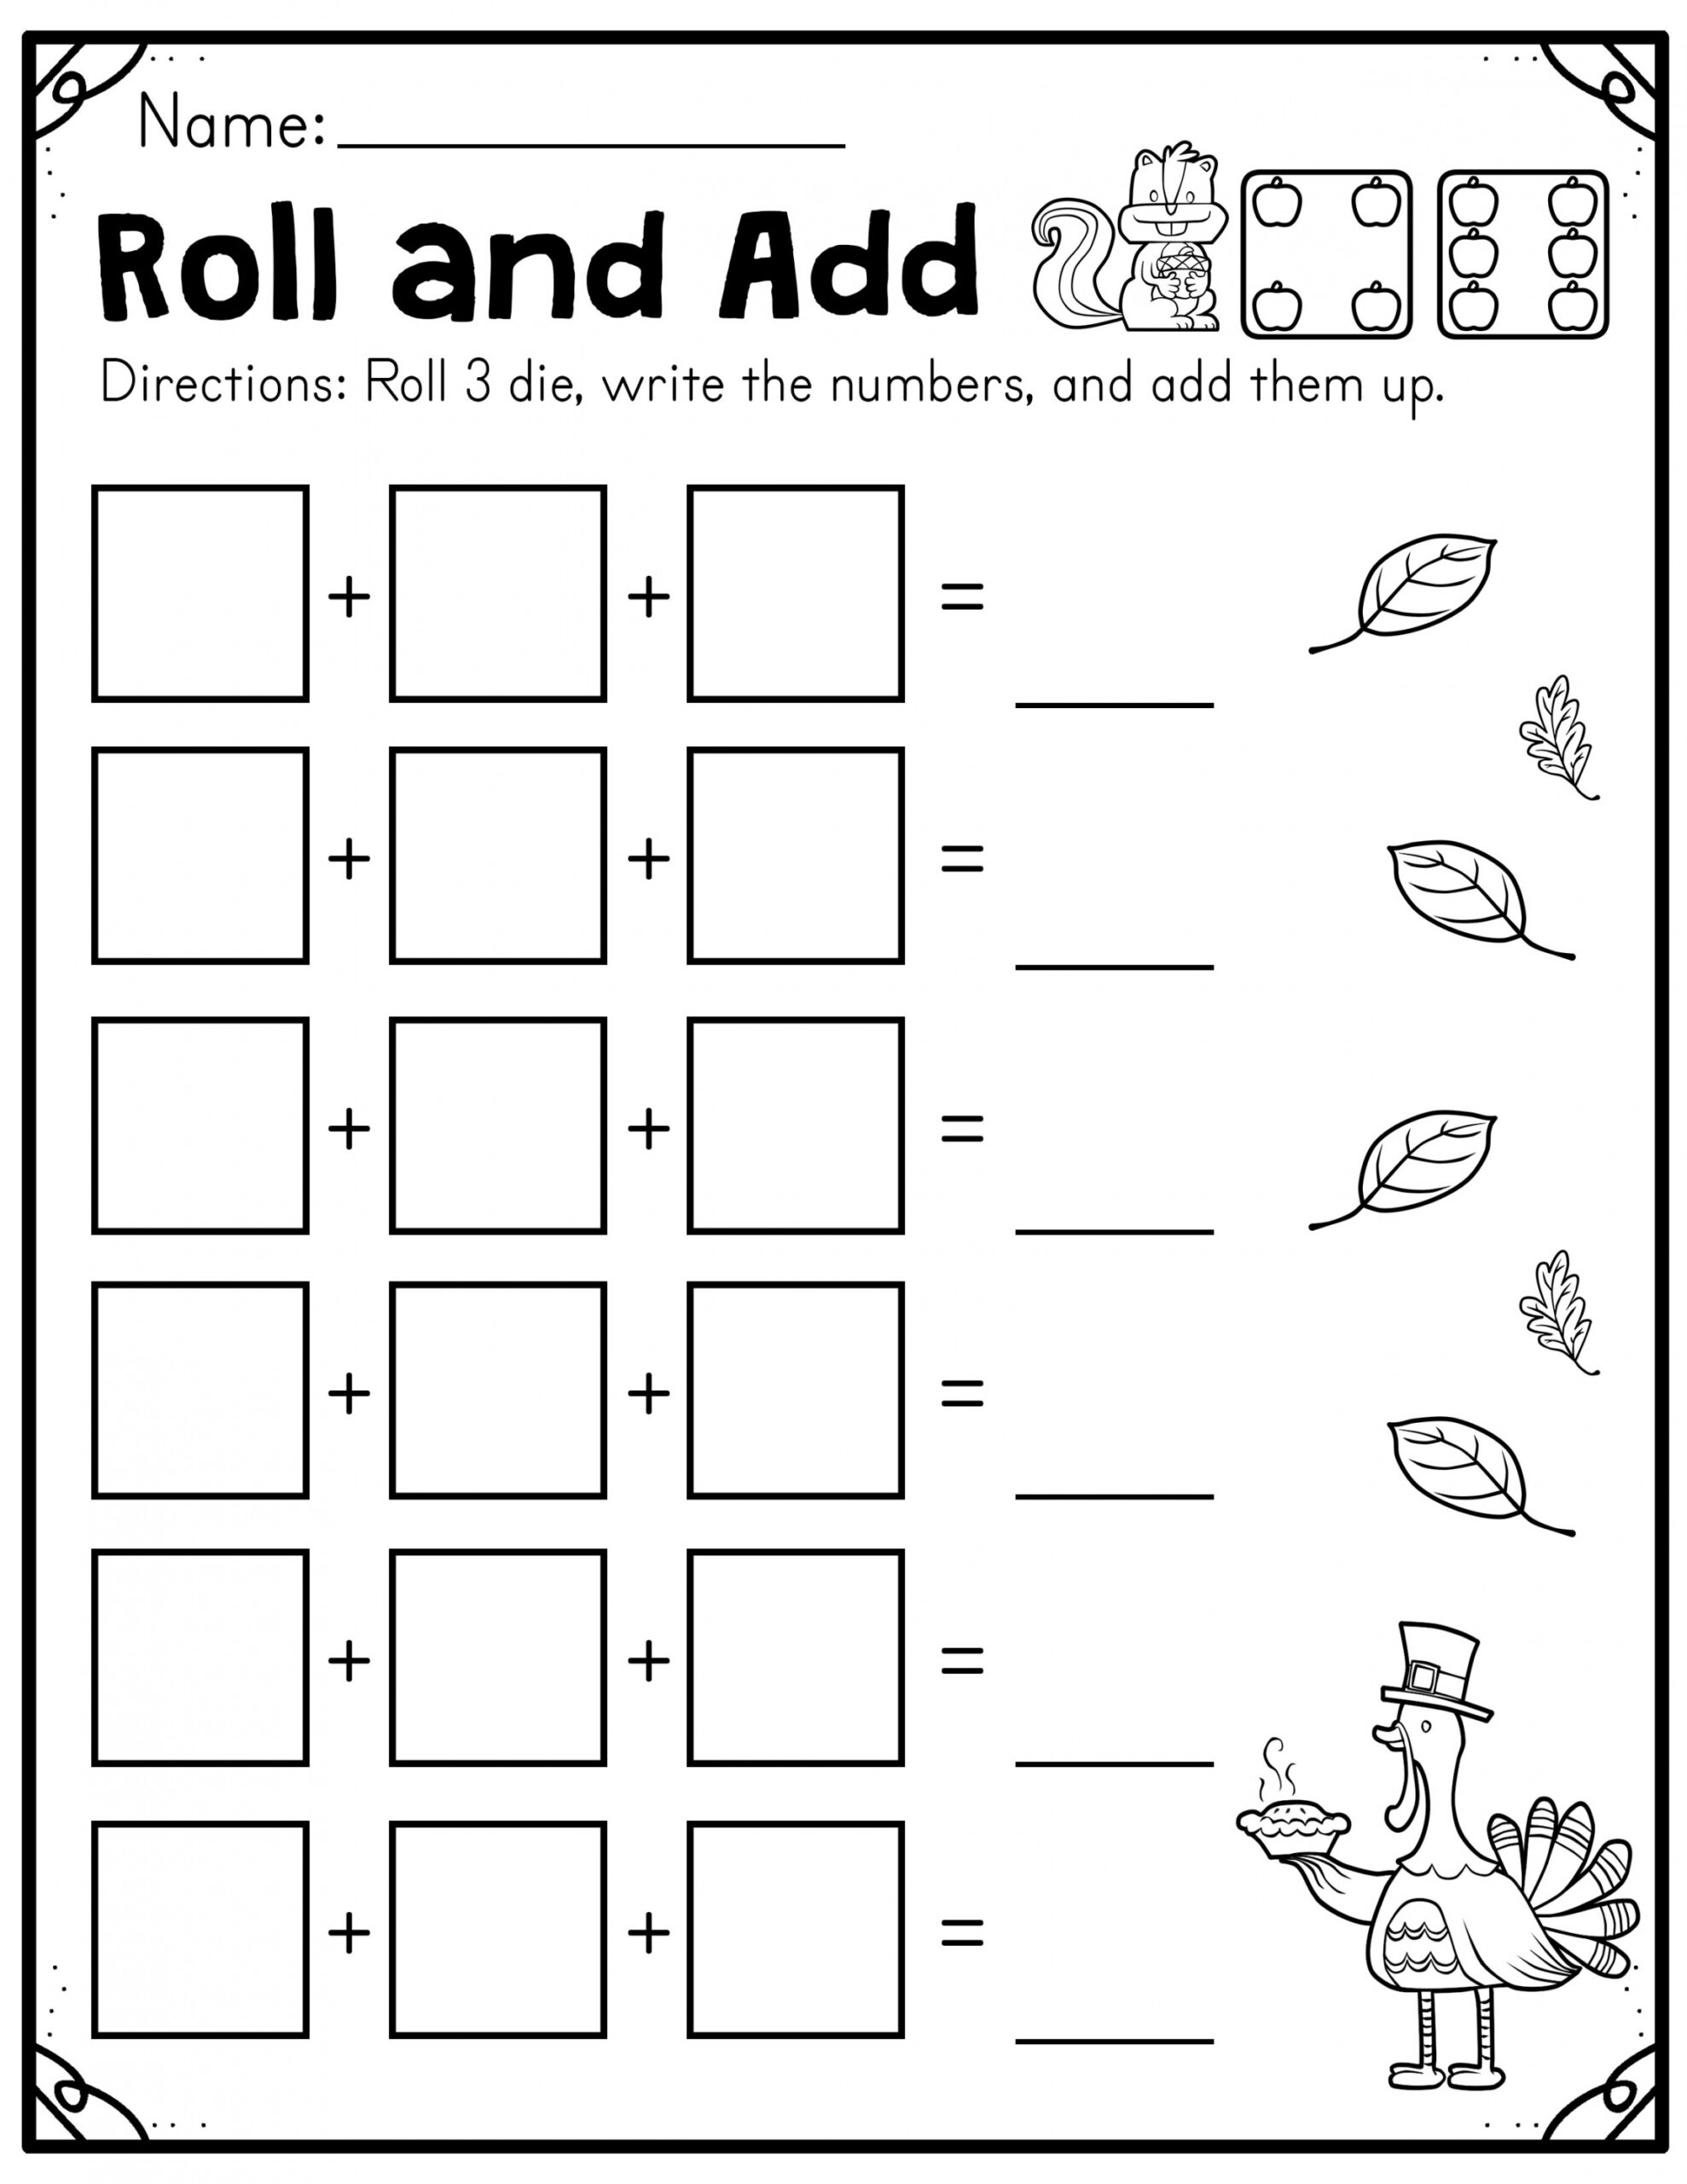 Fall Roll and Add Worksheet (First Grade)  Made By Teachers